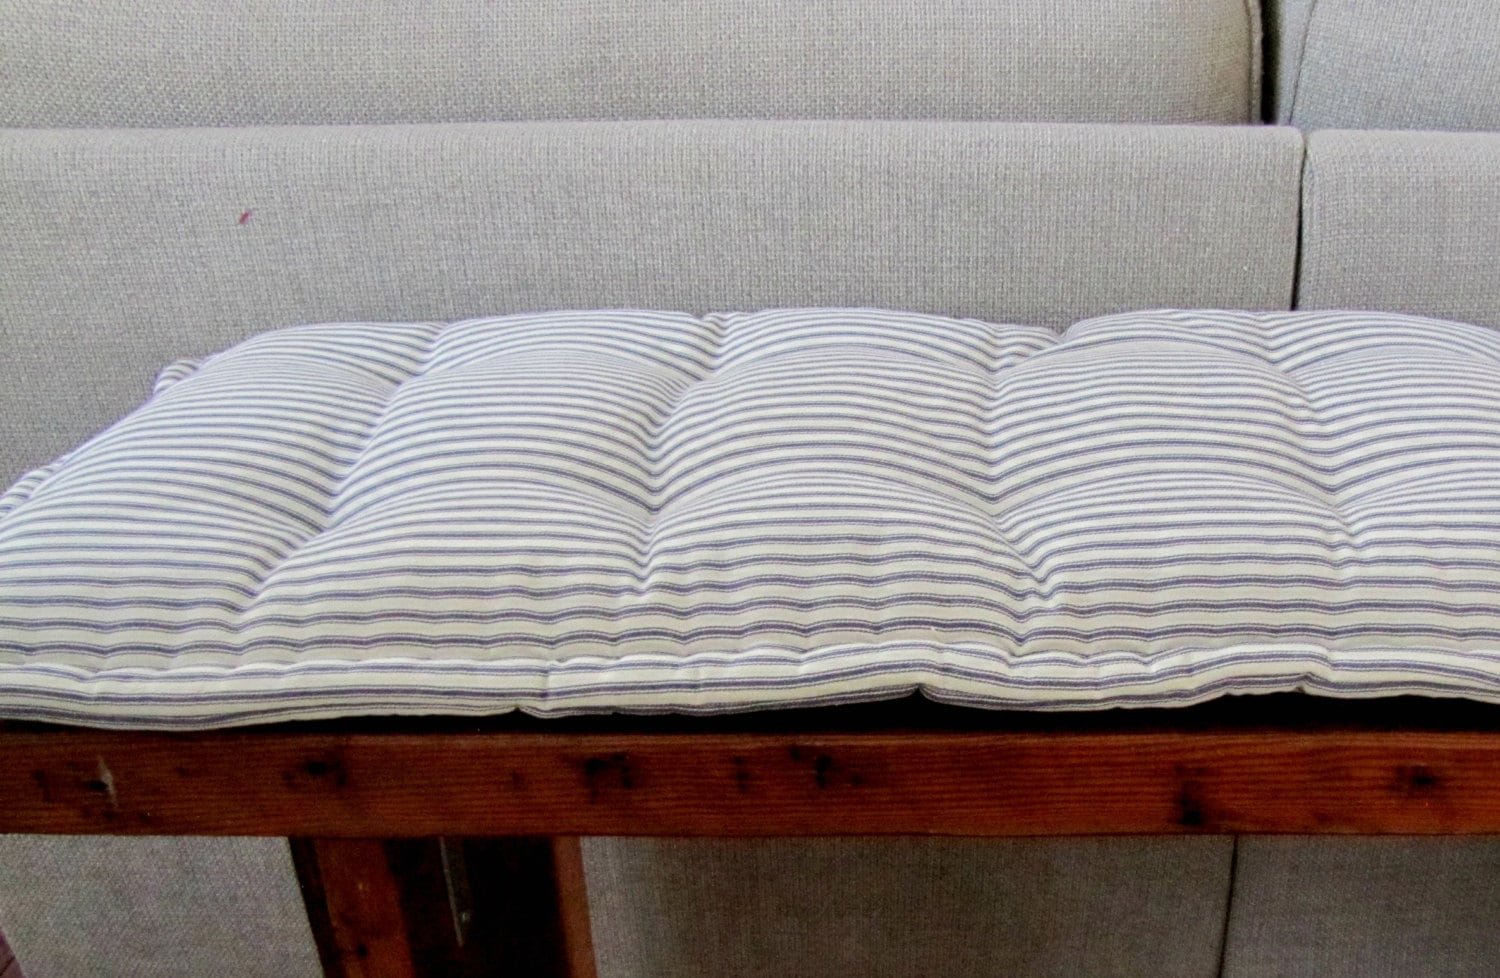 Grateful Home — French Mattress Custom Bench Cushion in Natural Linen for  Custom Closet Bedroom Seating